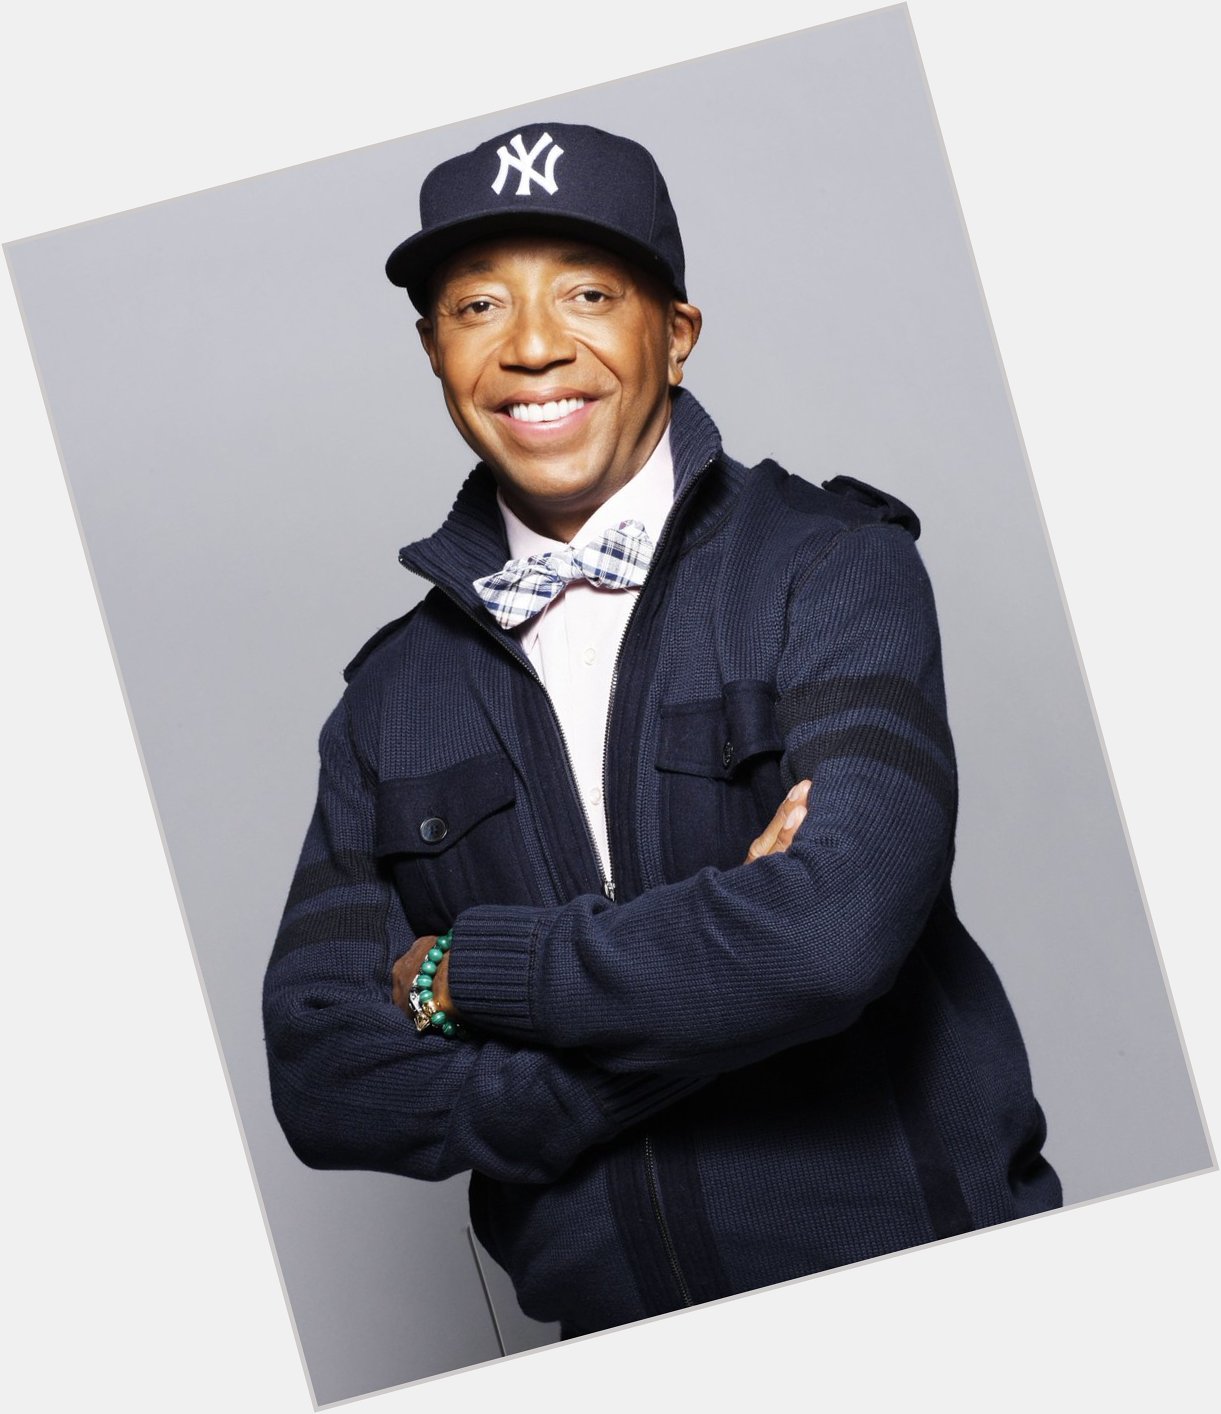 Happy Birthday to Russell Simmons who turns 60 today! 